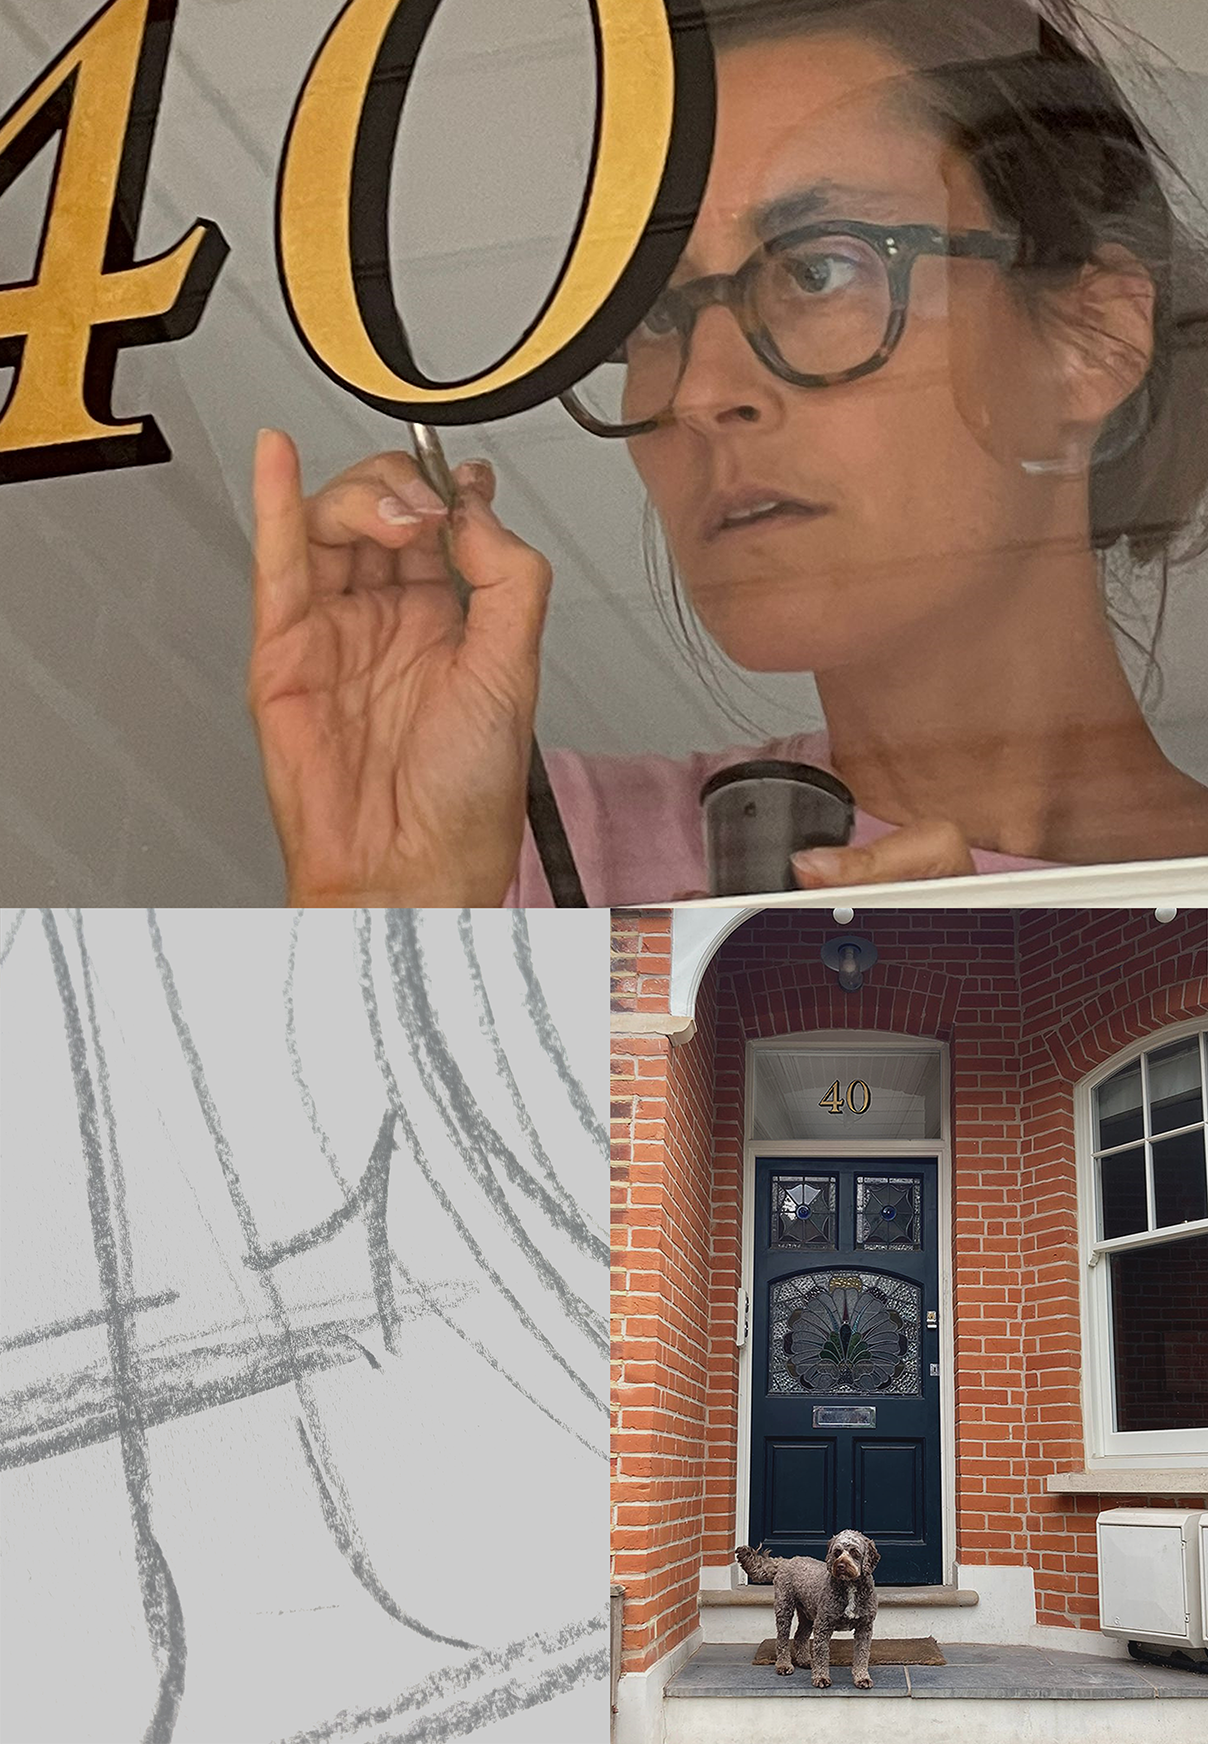 Seraina Signs London. Women sign artists Rising star Sign Painter. Painted House numbers names Lead times + prices. Traditional sign writers of London NGS Dulwich Margate Chelsea signwriters